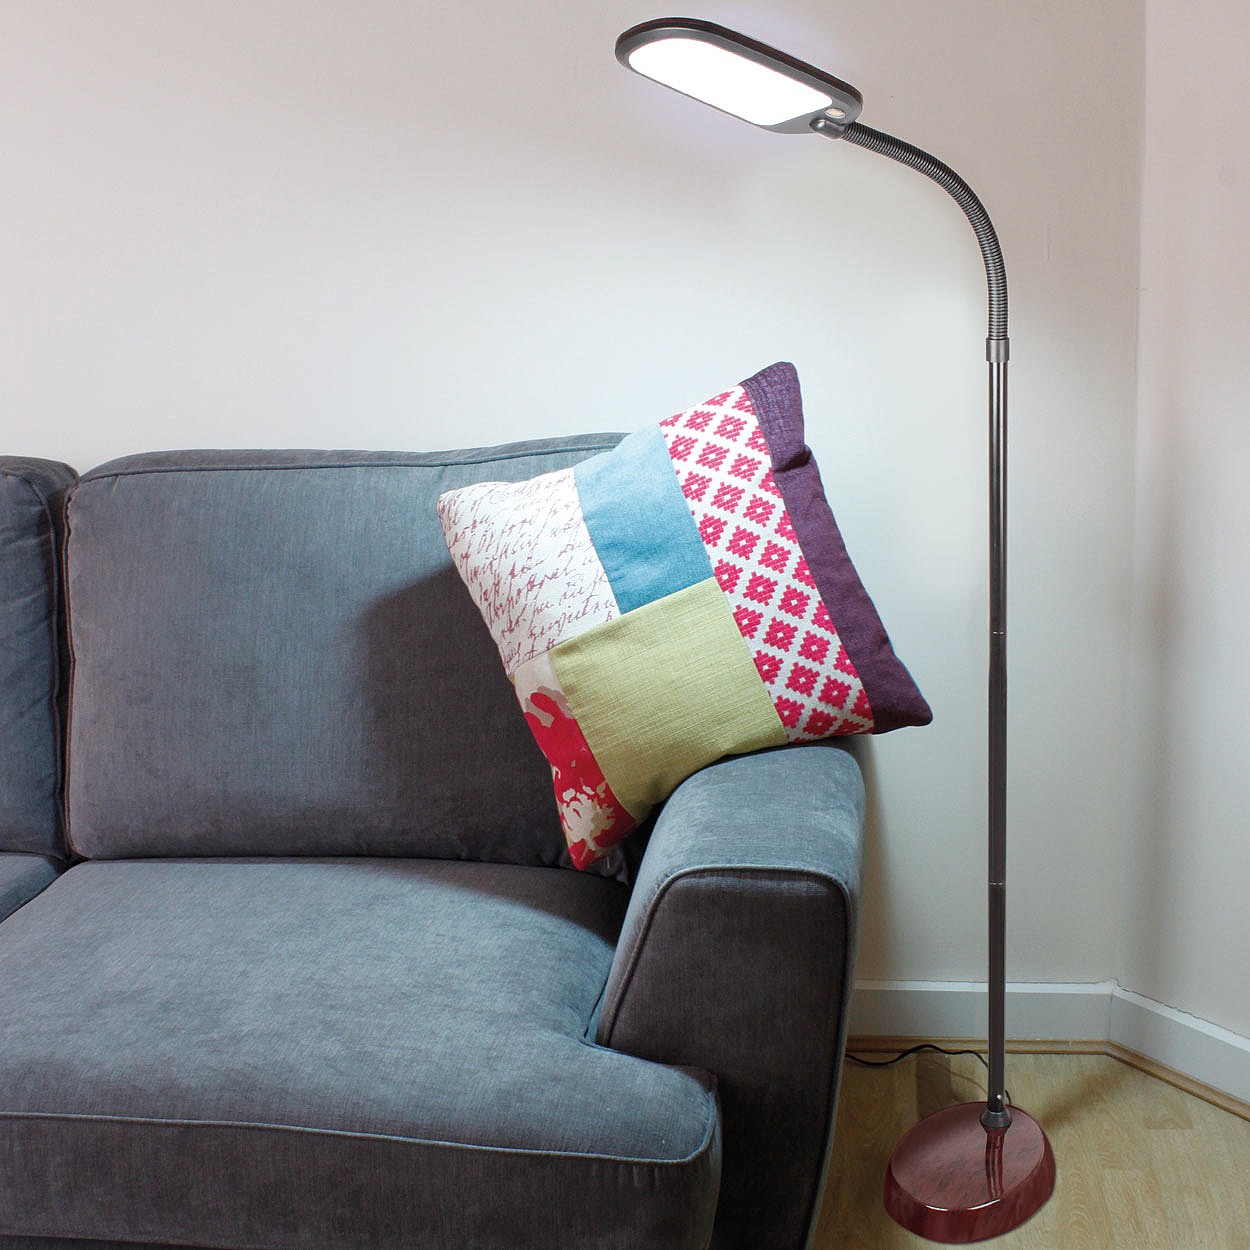 Touch Control Stepless Dimming LED Floor Lamp (1)